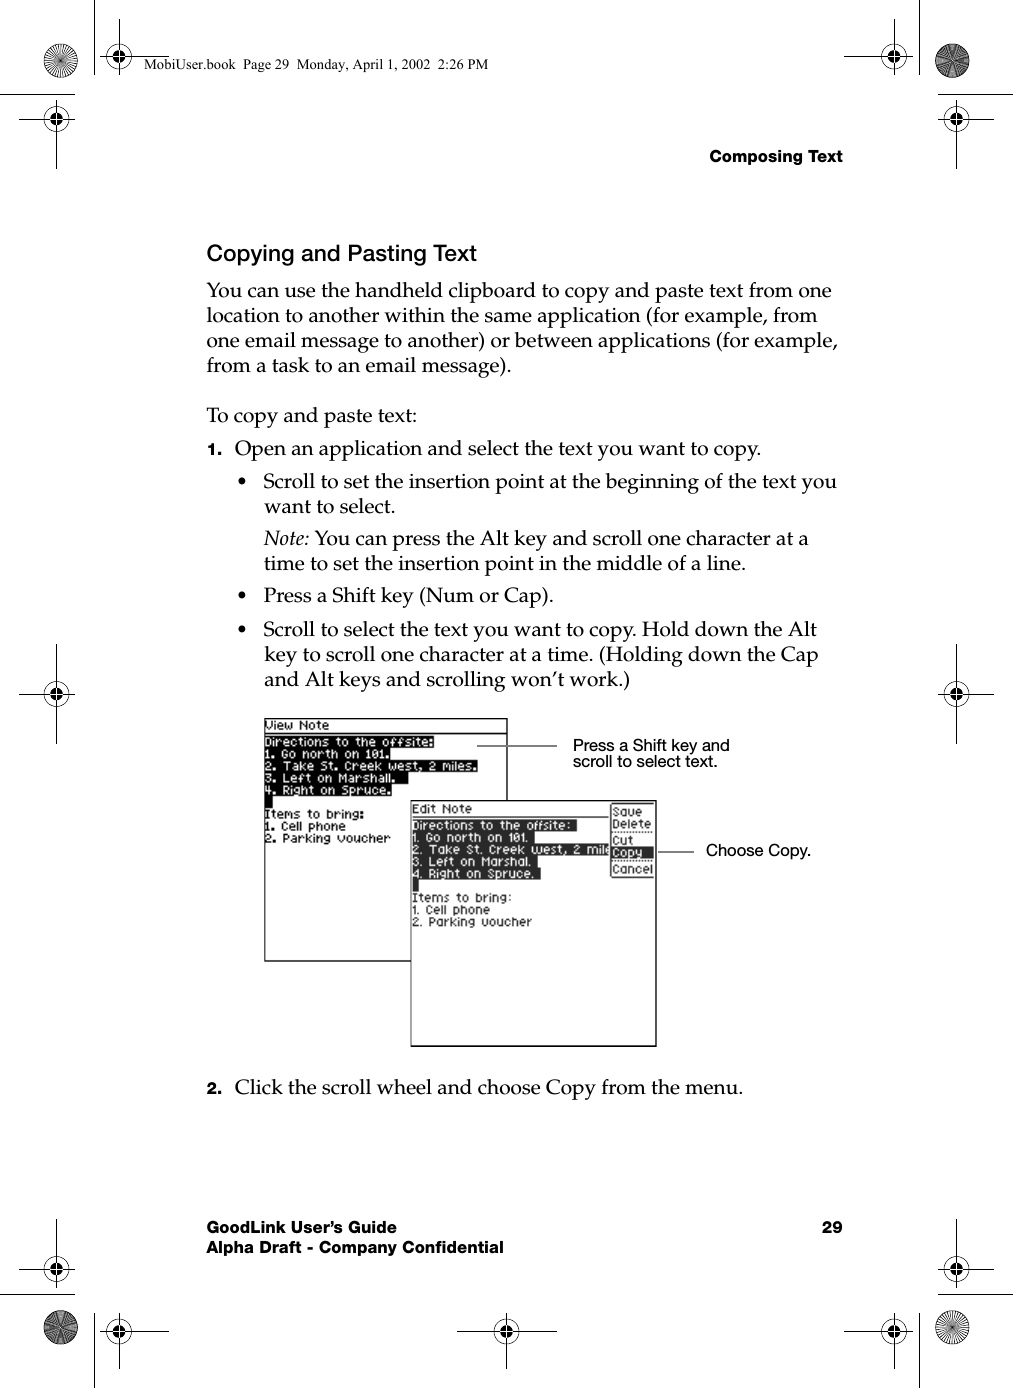 Composing TextGoodLink User’s Guide 29Alpha Draft - Company ConfidentialCopying and Pasting TextYou can use the handheld clipboard to copy and paste text from one location to another within the same application (for example, from one email message to another) or between applications (for example, from a task to an email message).To copy and paste text:1. Open an application and select the text you want to copy.•Scroll to set the insertion point at the beginning of the text you want to select. Note: You can press the Alt key and scroll one character at a time to set the insertion point in the middle of a line.•Press a Shift key (Num or Cap).•Scroll to select the text you want to copy. Hold down the Alt key to scroll one character at a time. (Holding down the Cap and Alt keys and scrolling won’t work.)2. Click the scroll wheel and choose Copy from the menu.Press a Shift key and scroll to select text.Choose Copy.MobiUser.book  Page 29  Monday, April 1, 2002  2:26 PM